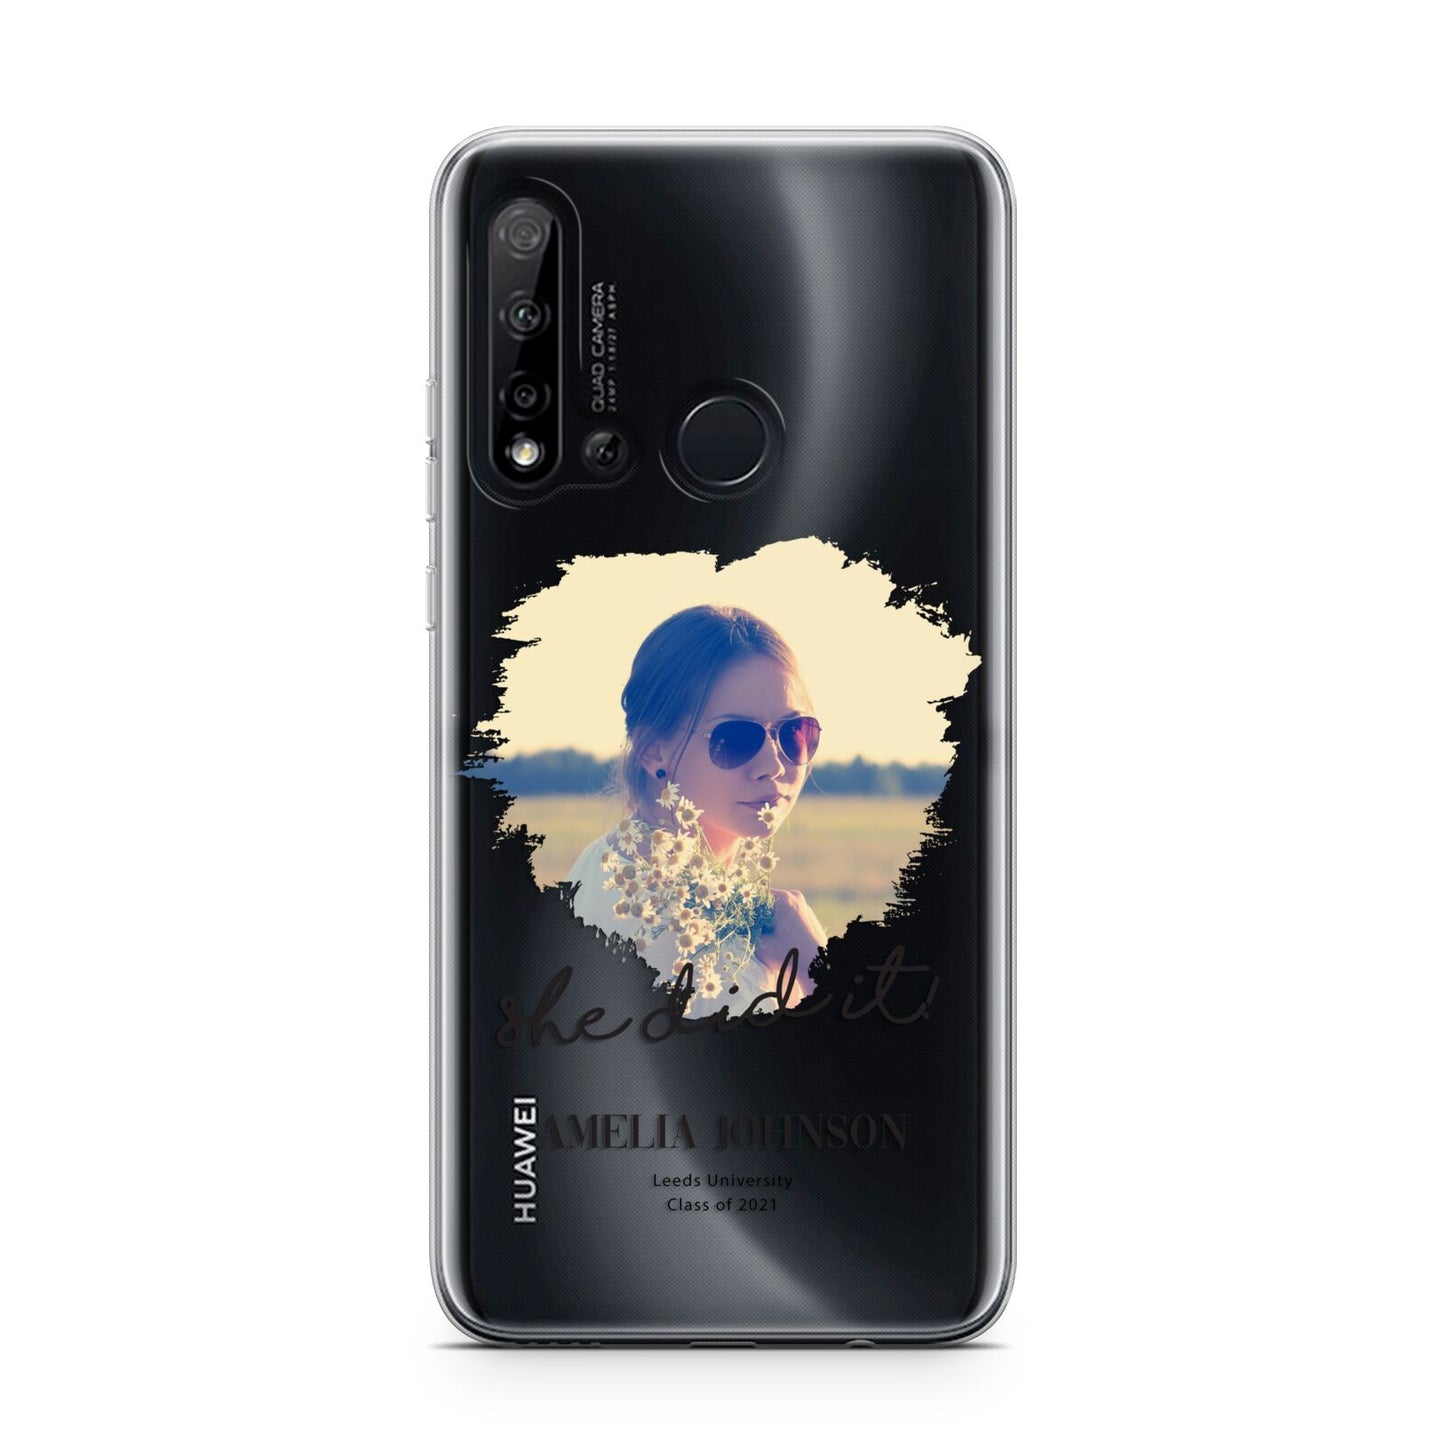 She Did It Graduation Photo with Name Huawei P20 Lite 5G Phone Case